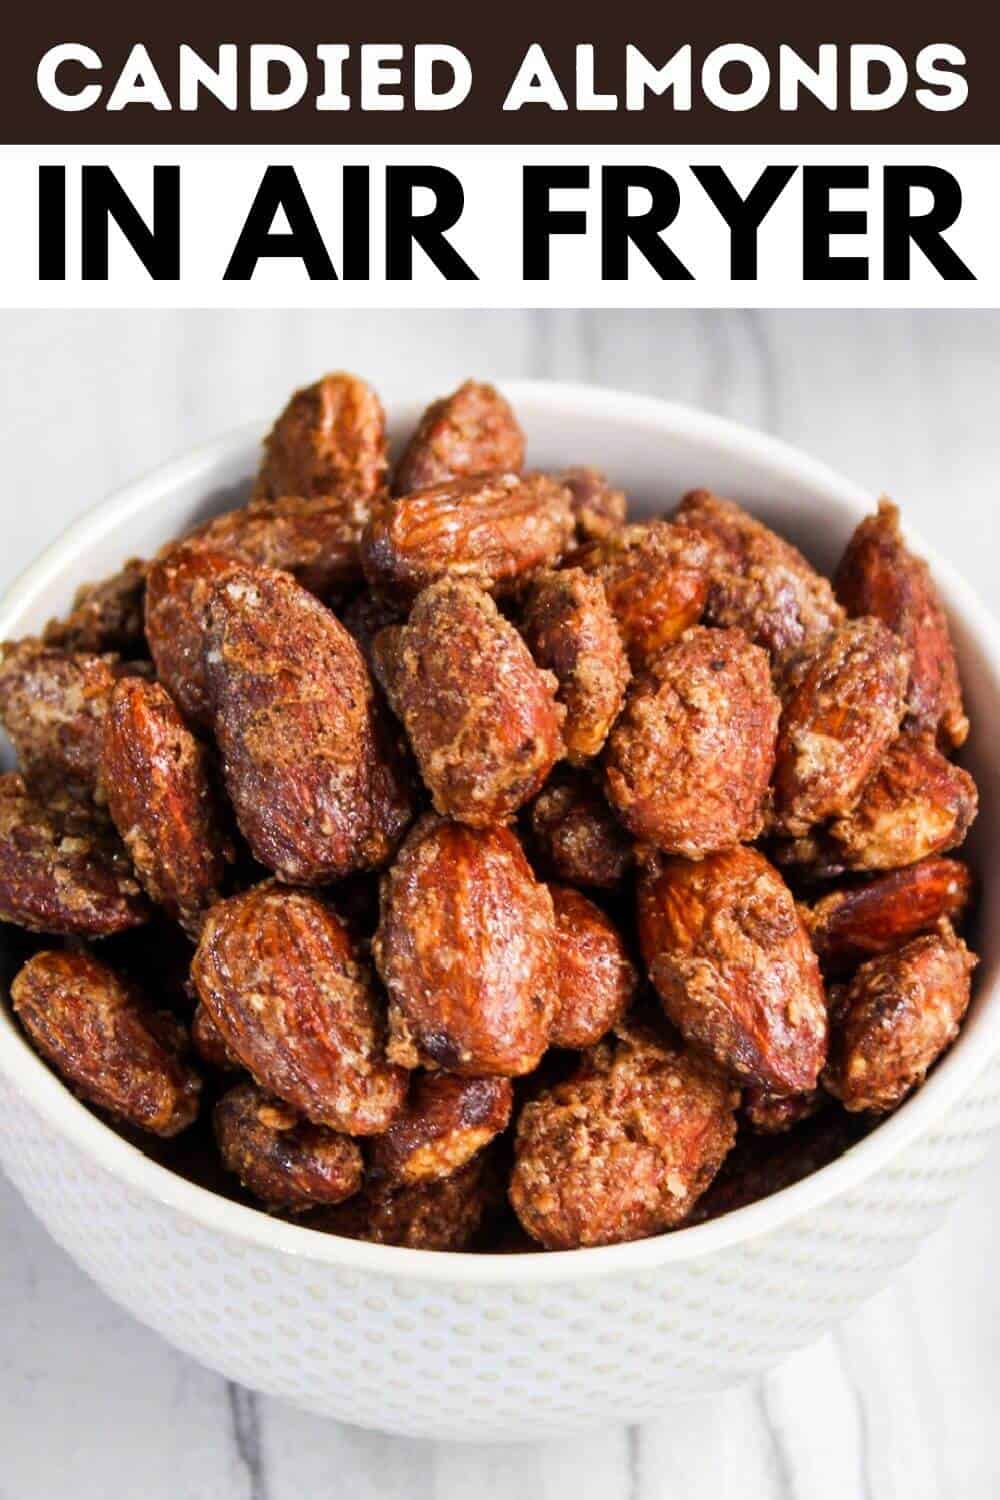 Try making delicious candied almonds using your air fryer.